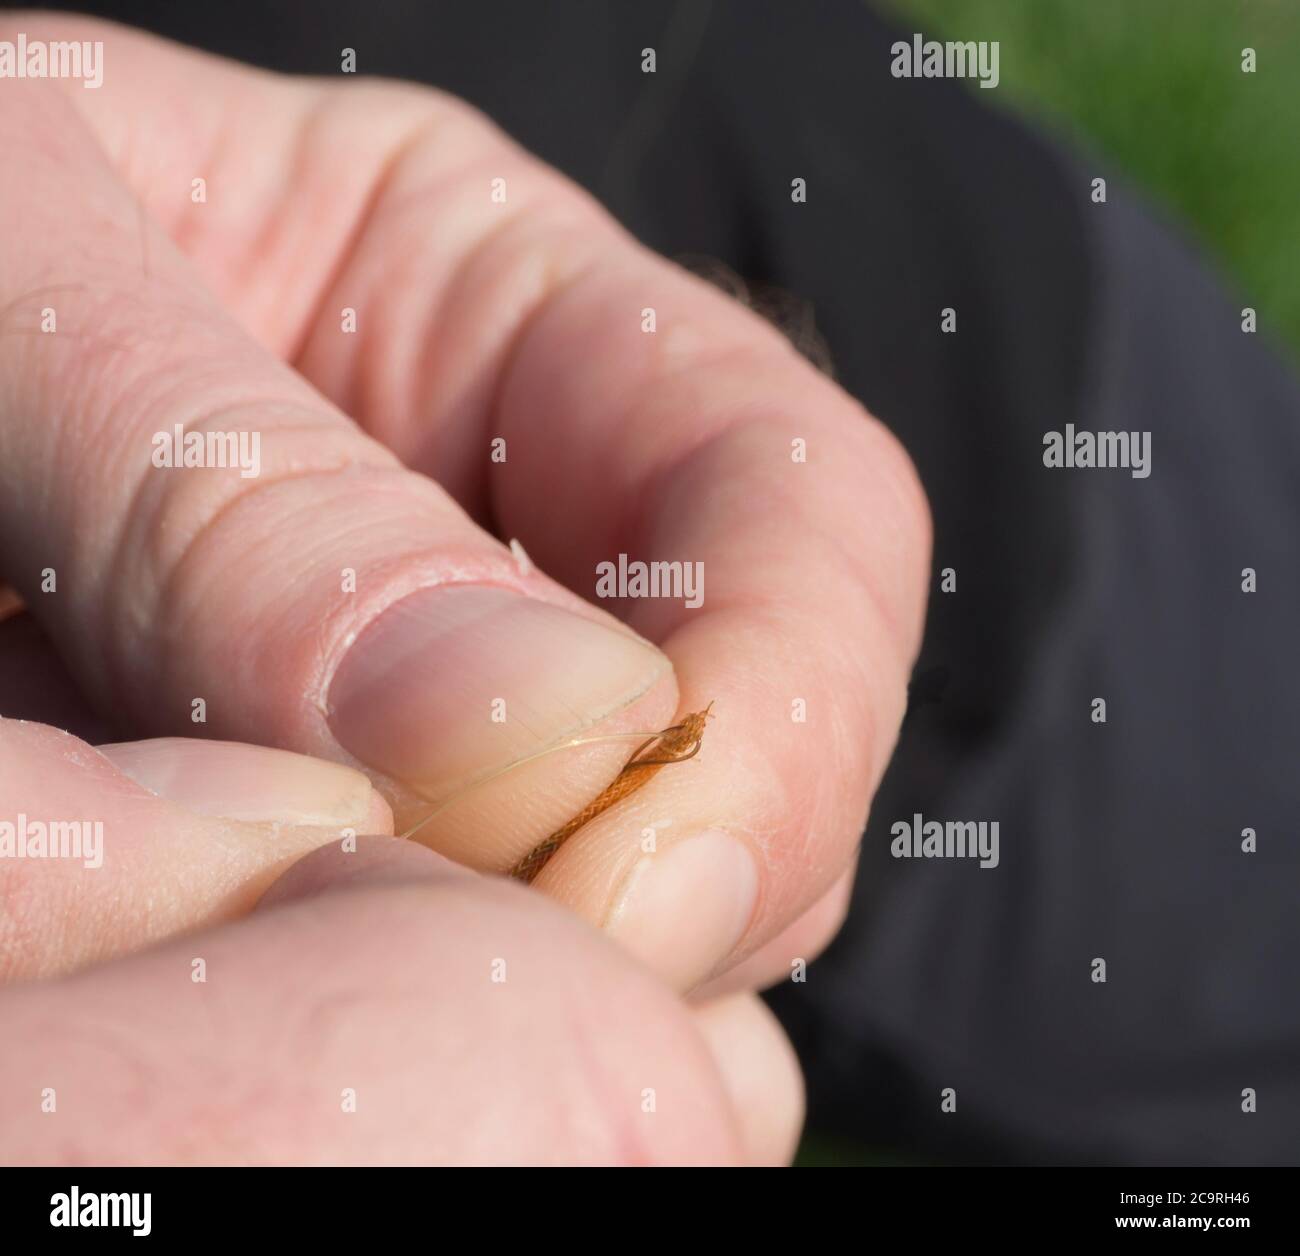 https://c8.alamy.com/comp/2C9RH46/close-up-macro-man-hands-focusing-on-tied-up-fishing-line-end-for-angling-2C9RH46.jpg